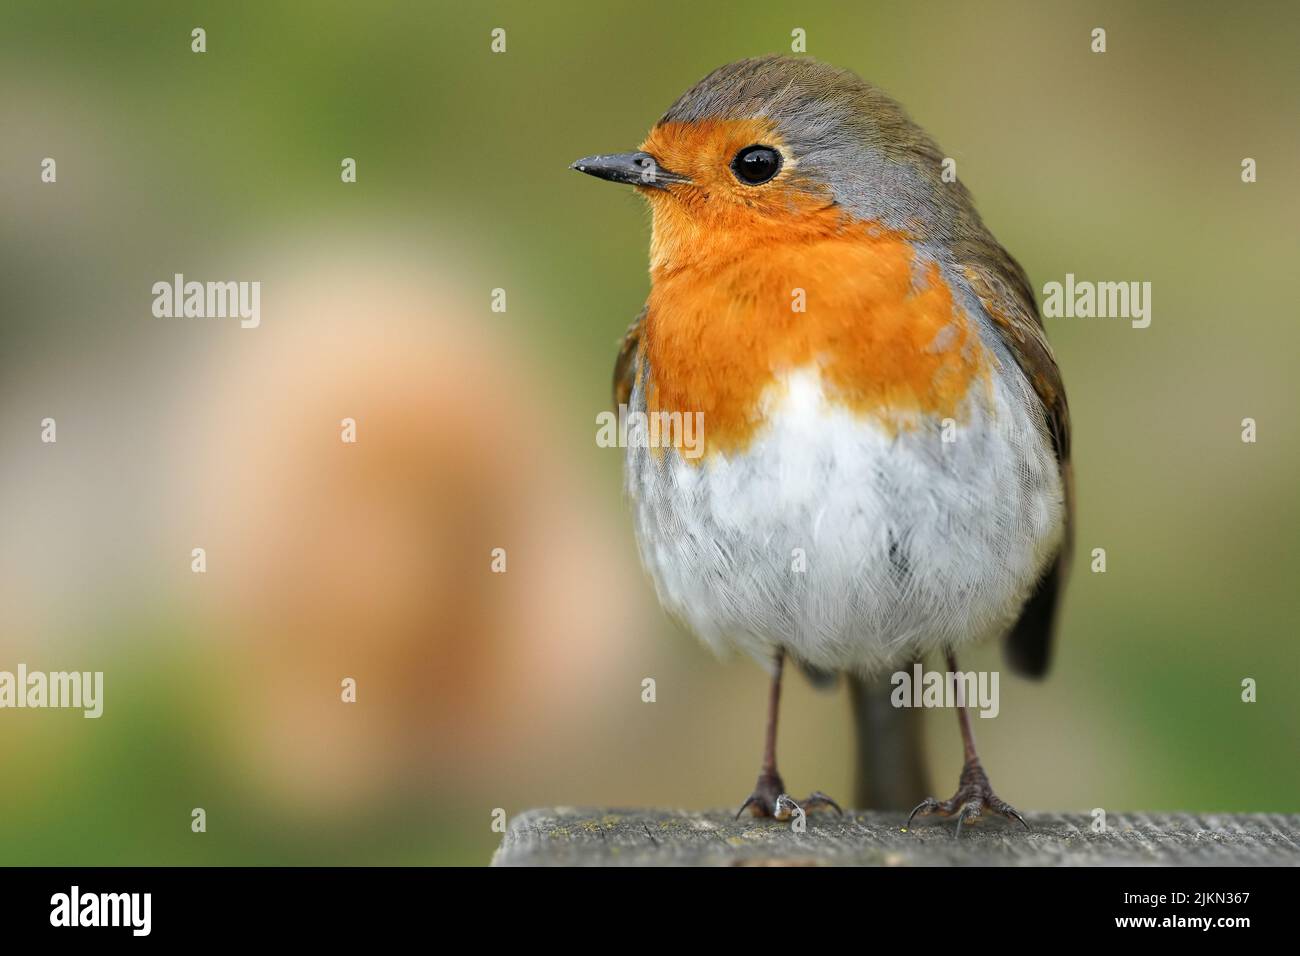 A closeup of a robin bird perching on concrete surface against a bokeh nature background Stock Photo